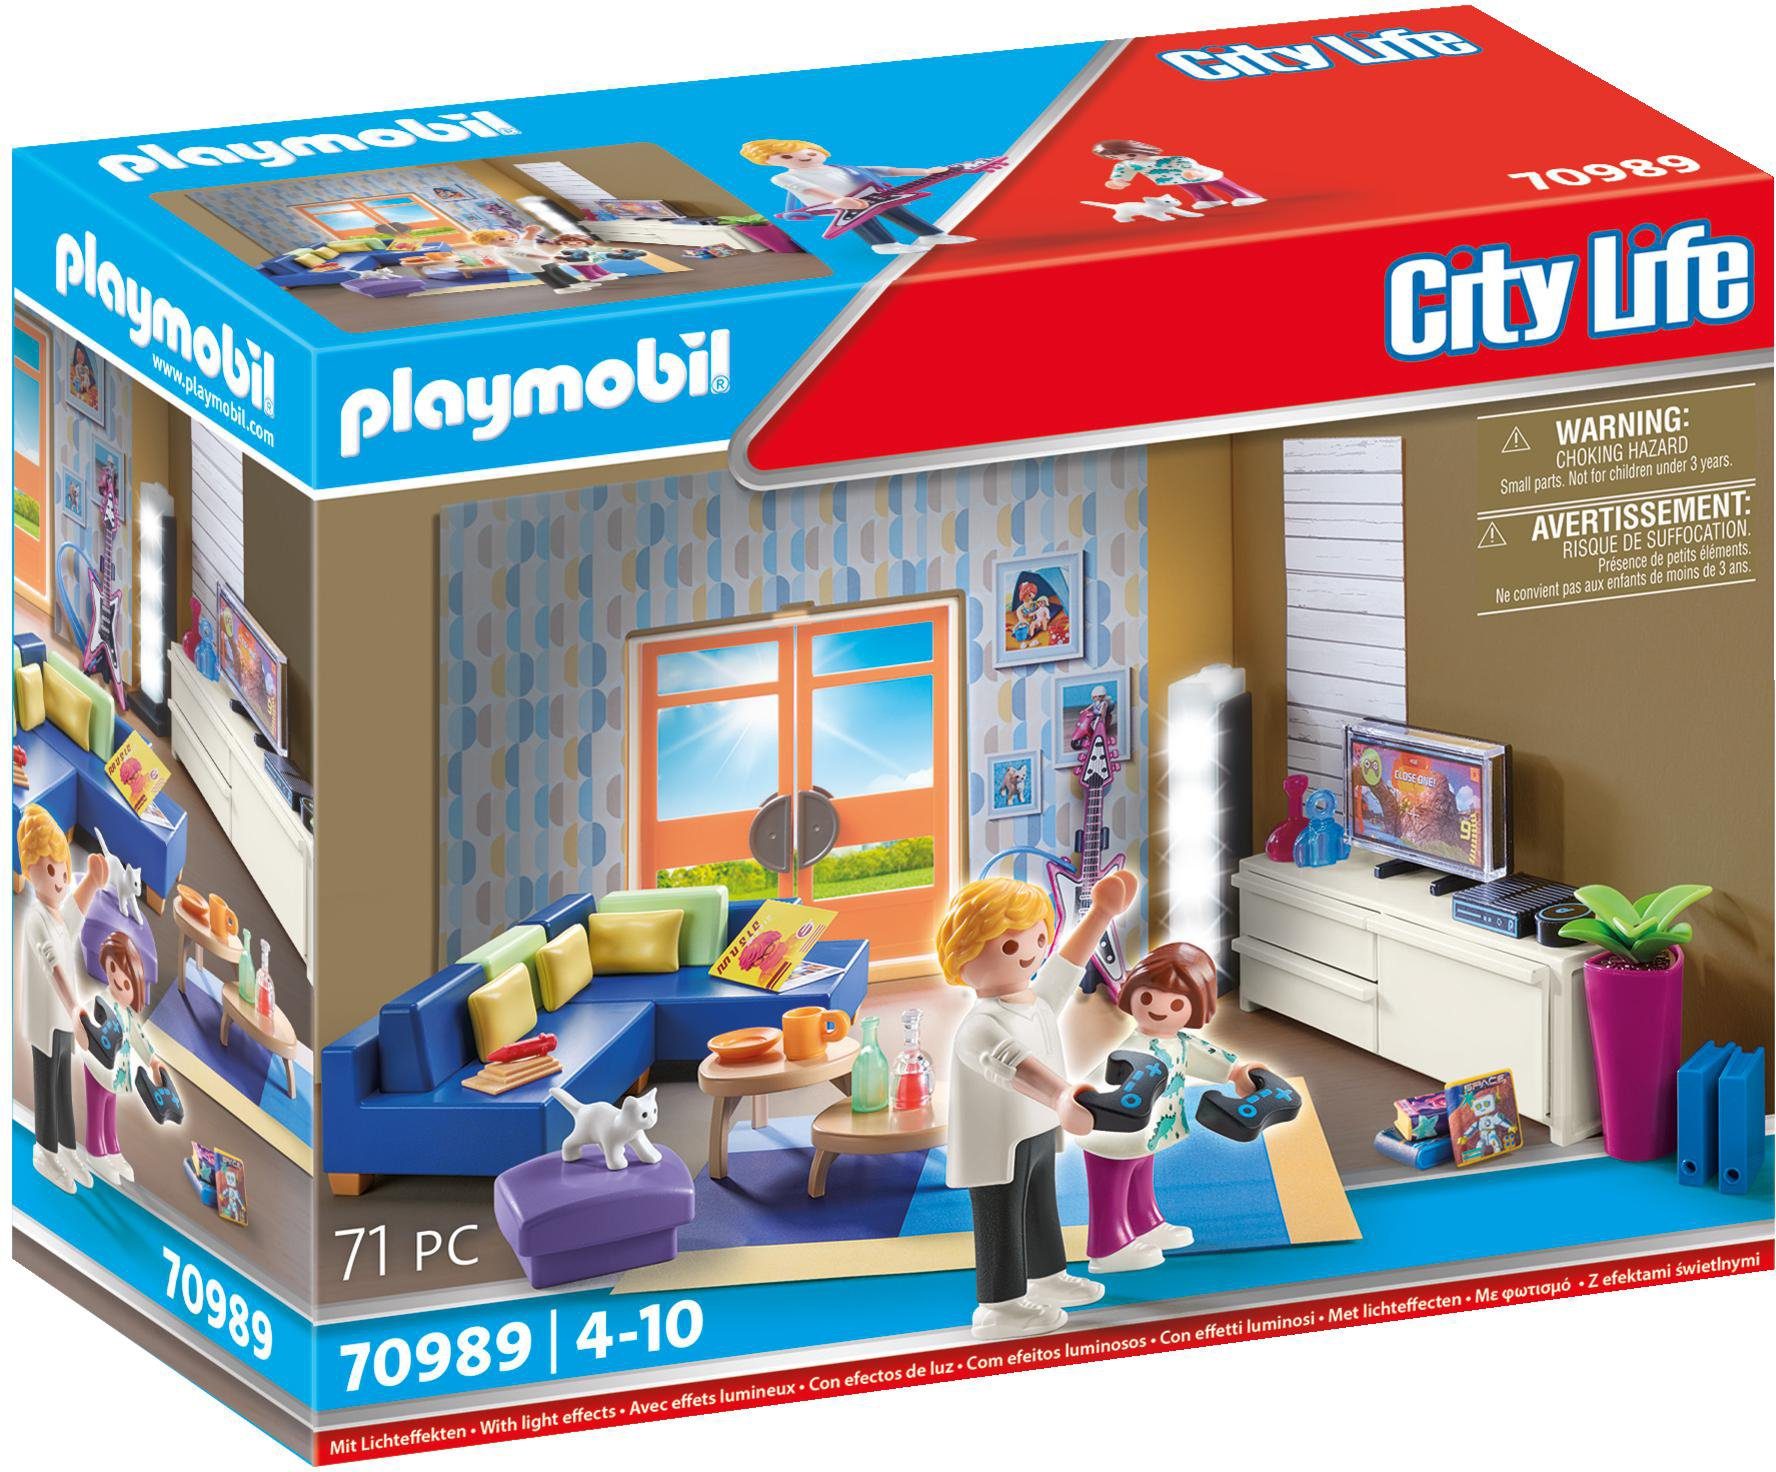 Playmobil® Konstruktions-Spielset Wohnzimmer (70989), City Life, (71 St),  Made in Germany